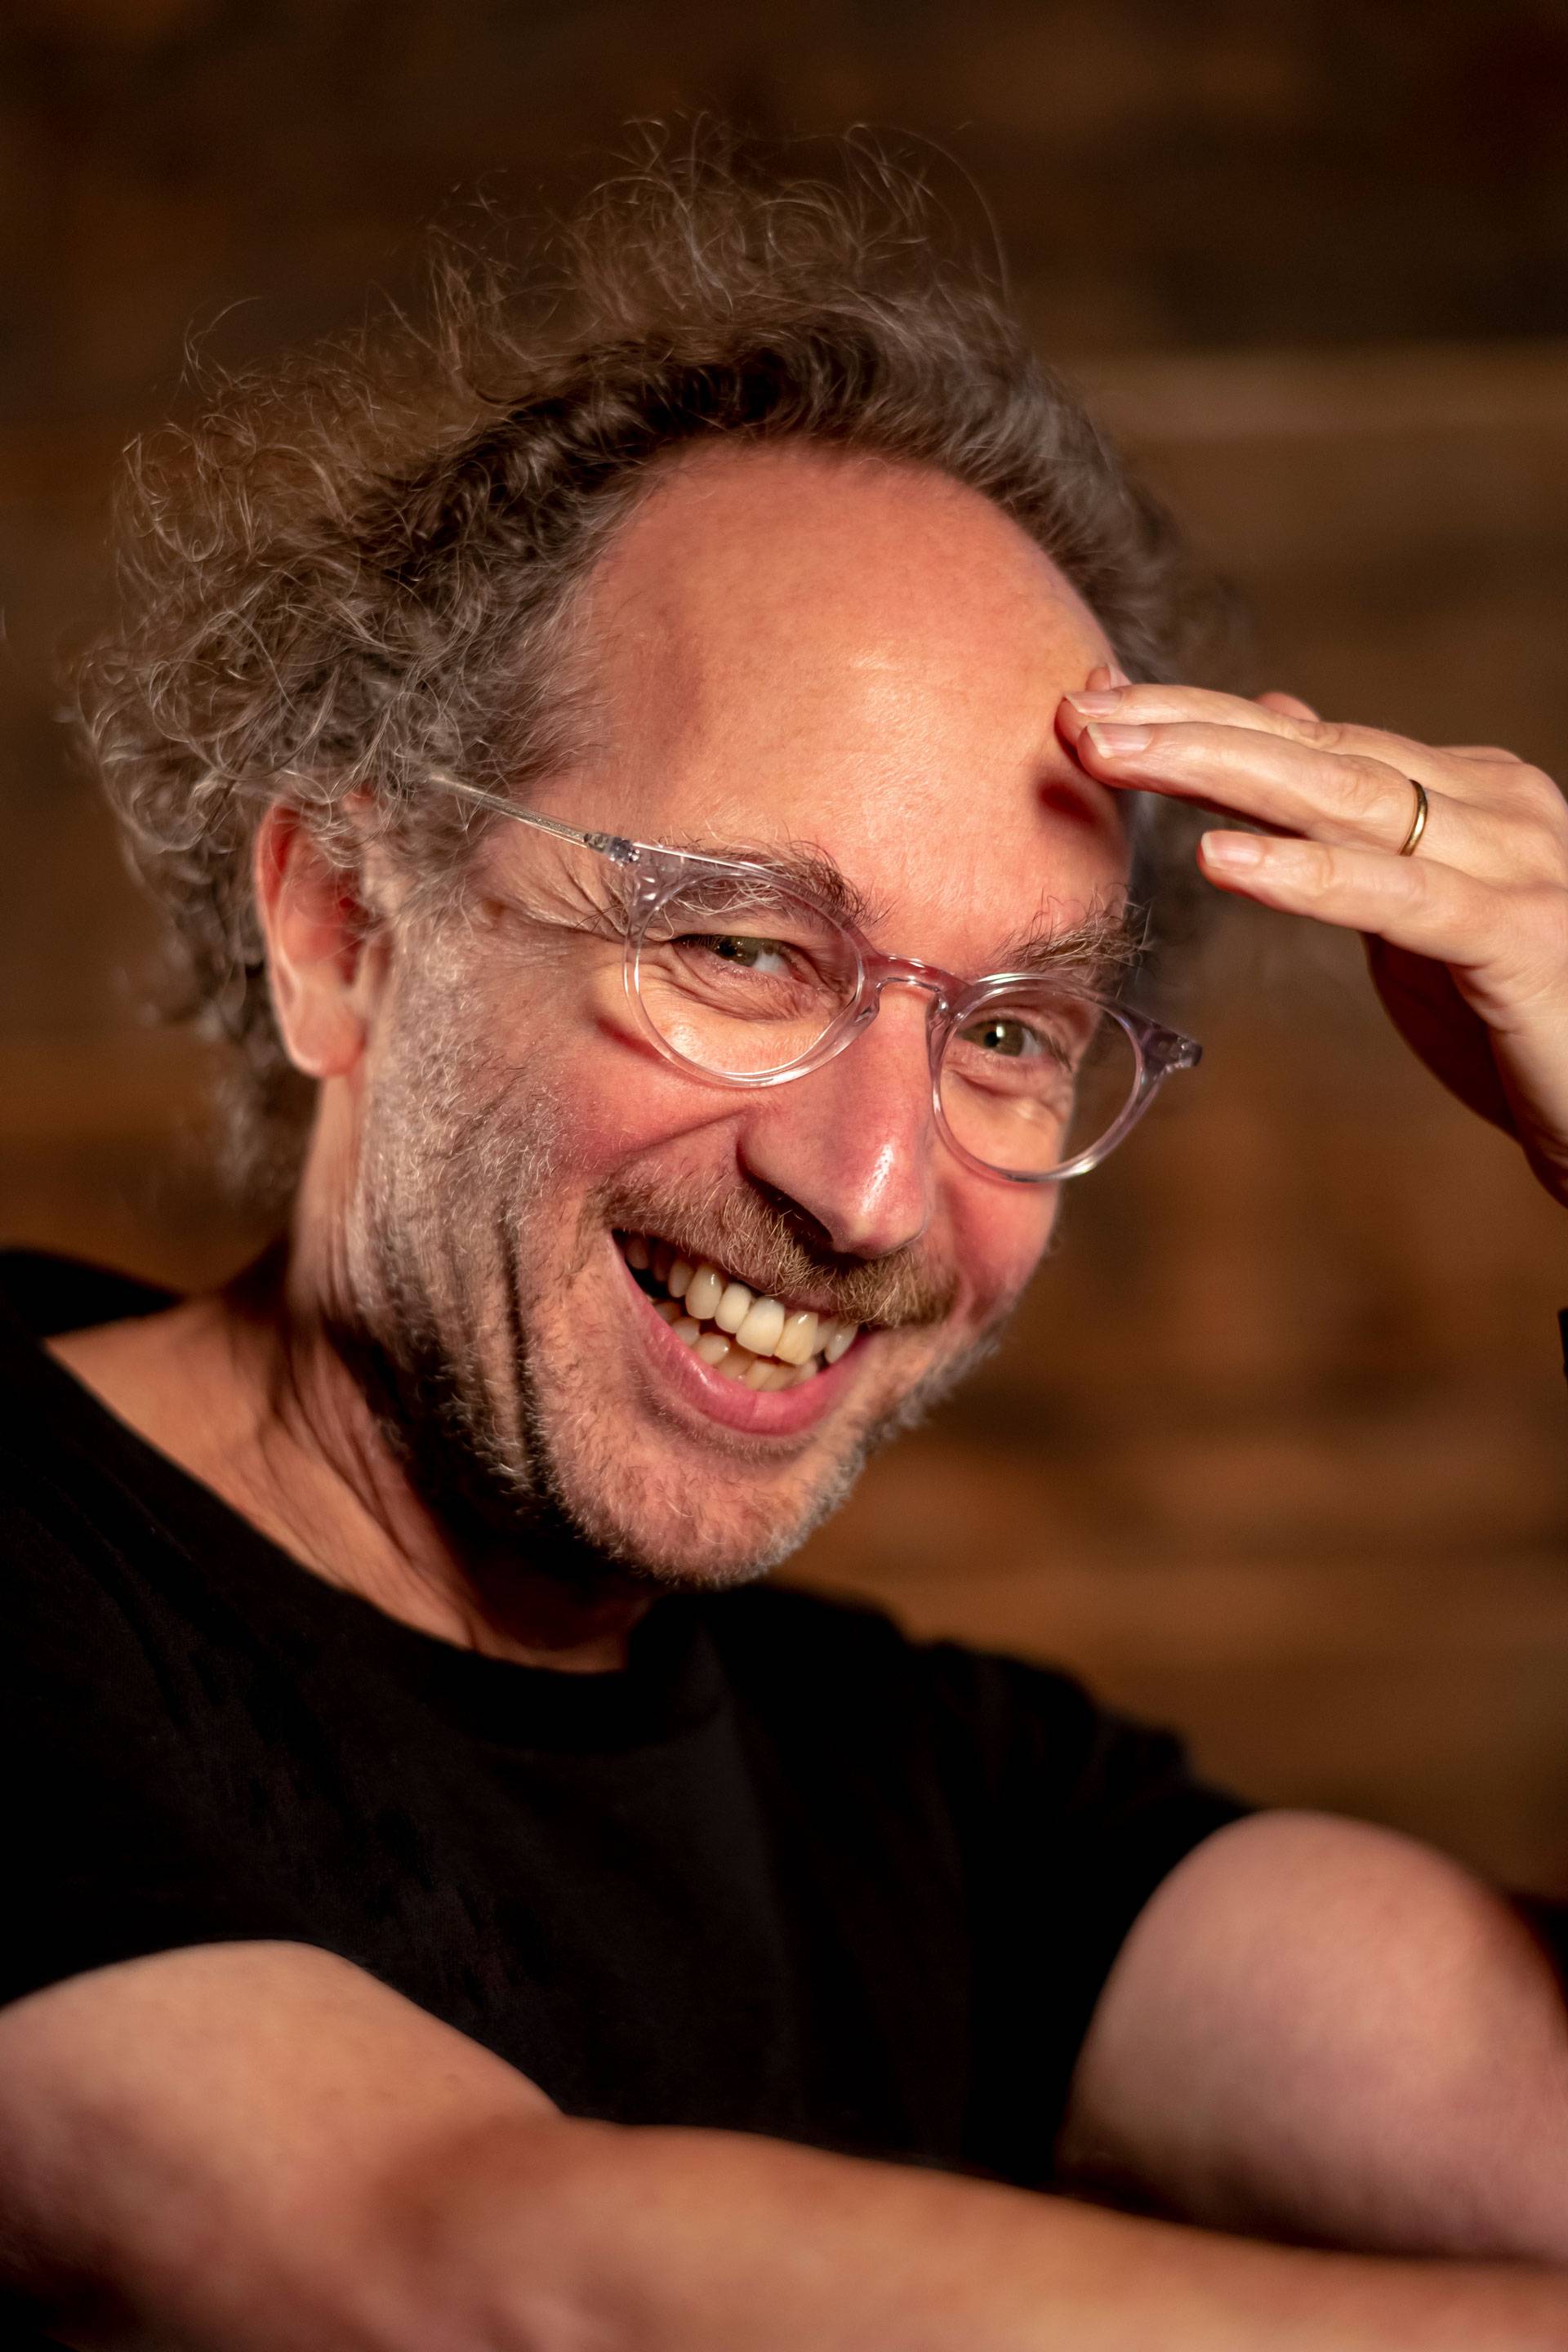 Portrait of Tod Machover. He is smiling from the side, wearing a black t-shirt and has one hand to his forehead